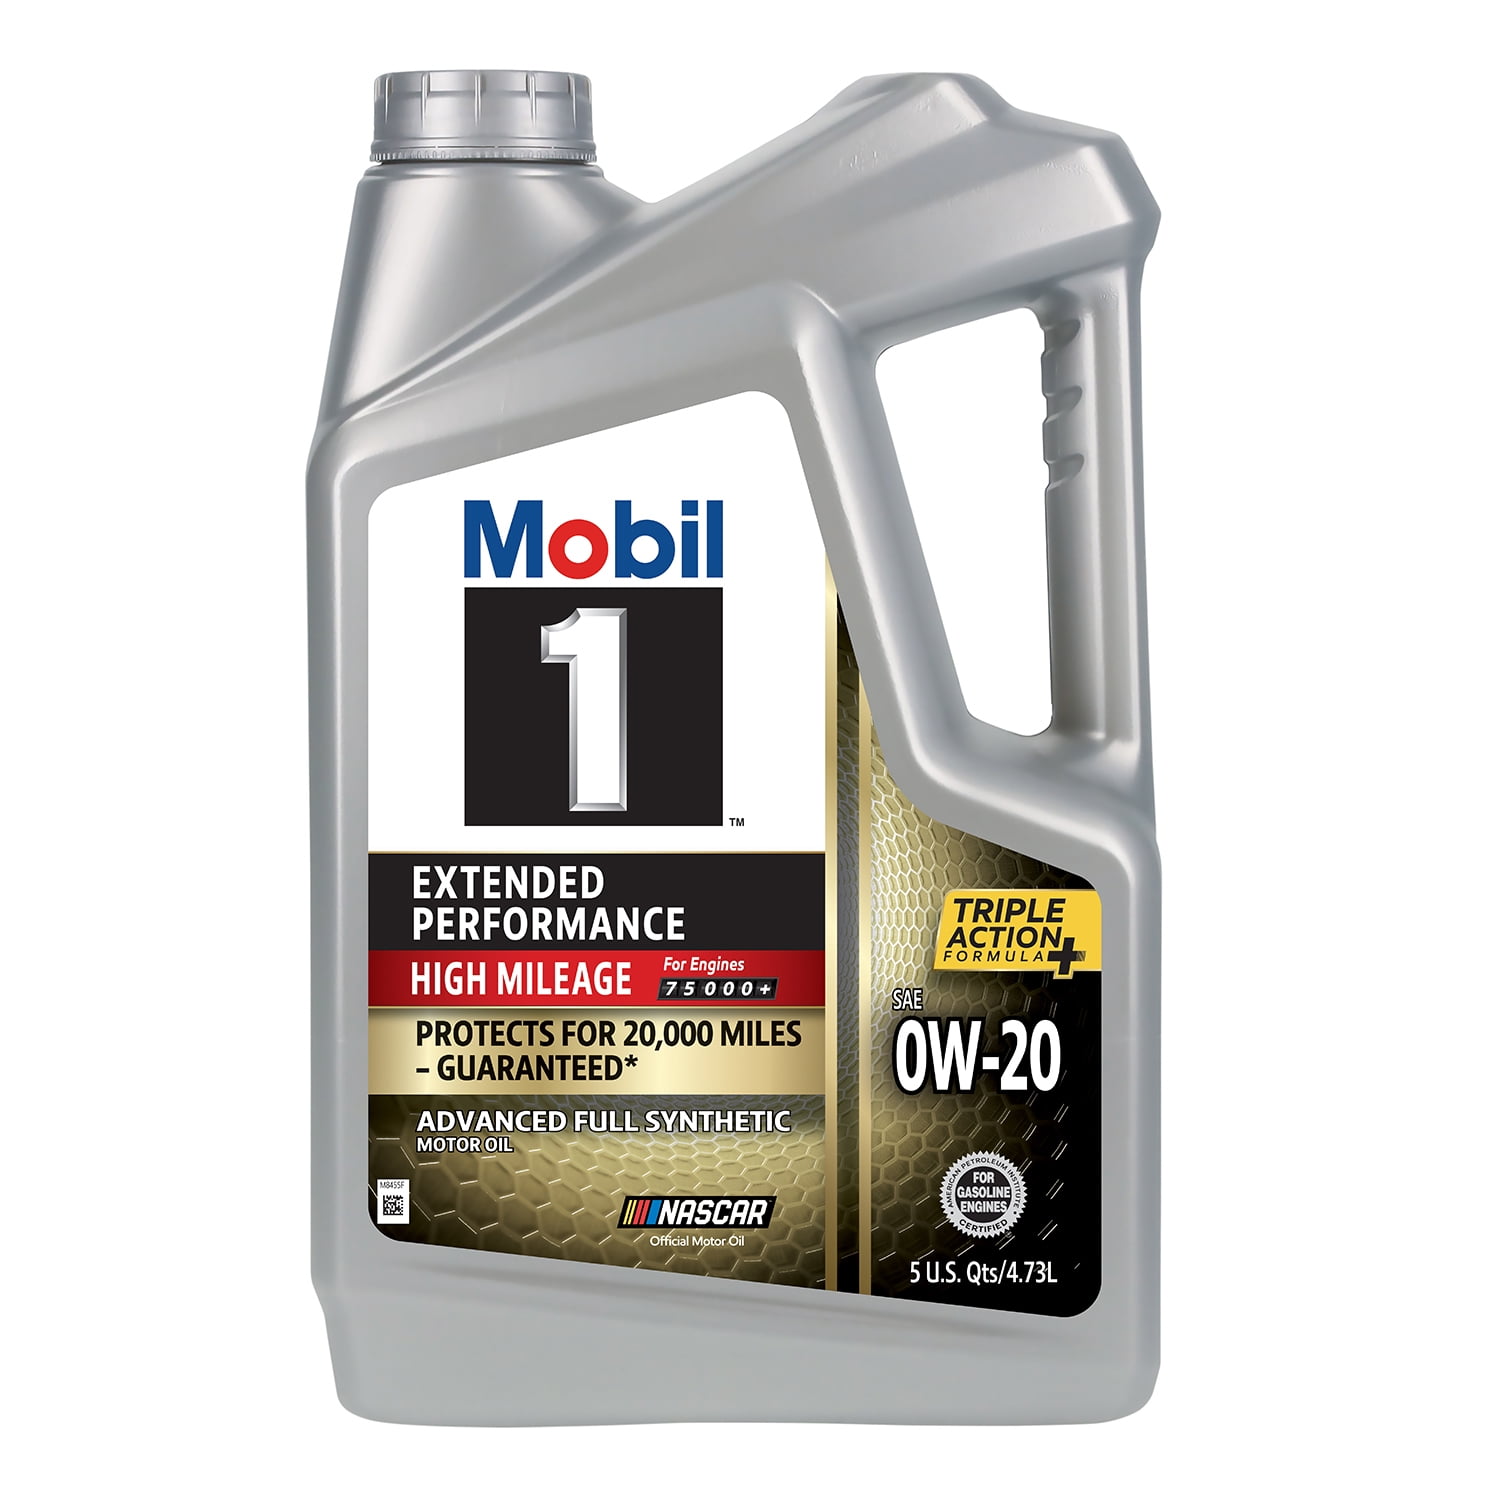 Mobil 1 Extended Performance High Mileage Full Synthetic Motor Oil 0W-20, 5 qt - 1